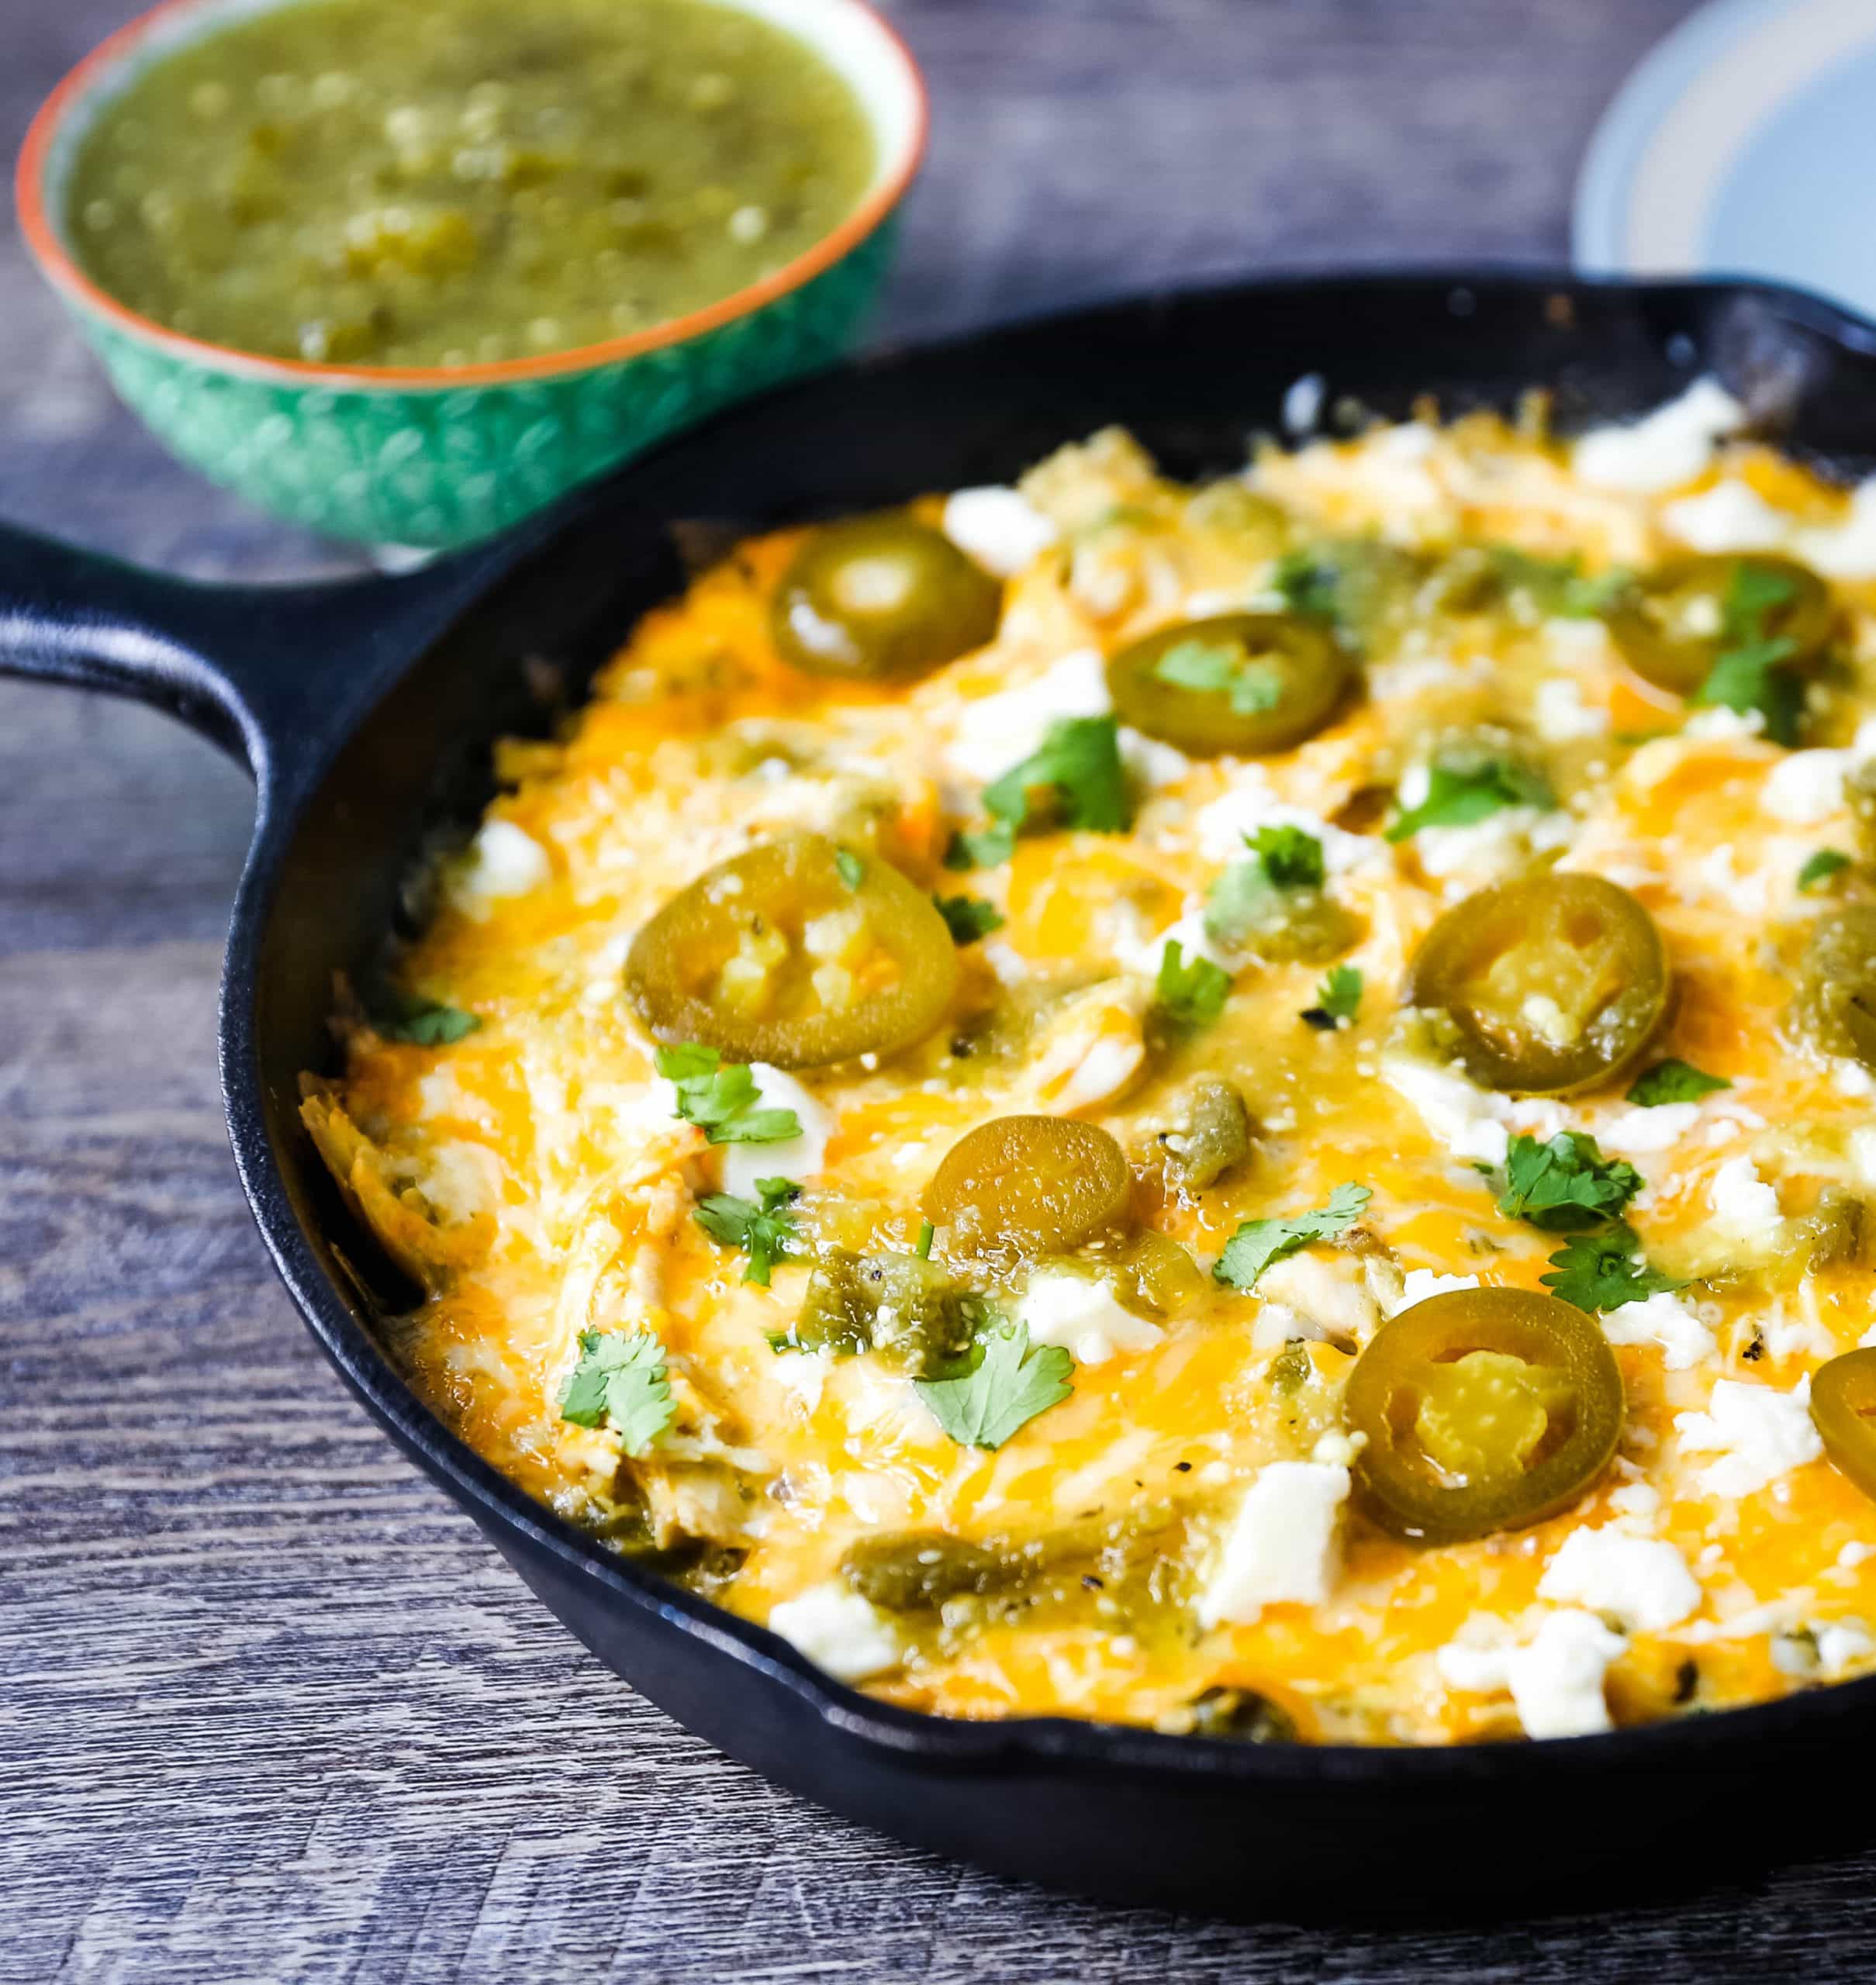 Chicken Stacked Enchiladas Quick and easy stacked chicken enchiladas with salsa verde and Mexican cheeses. Authentic Mexican chicken enchiladas that can be thrown together in a snap! The best stacked chicken enchiladas recipe. www.modernhoney.com #enchiladas #mexicanfood #chicken #chickenenchiladas